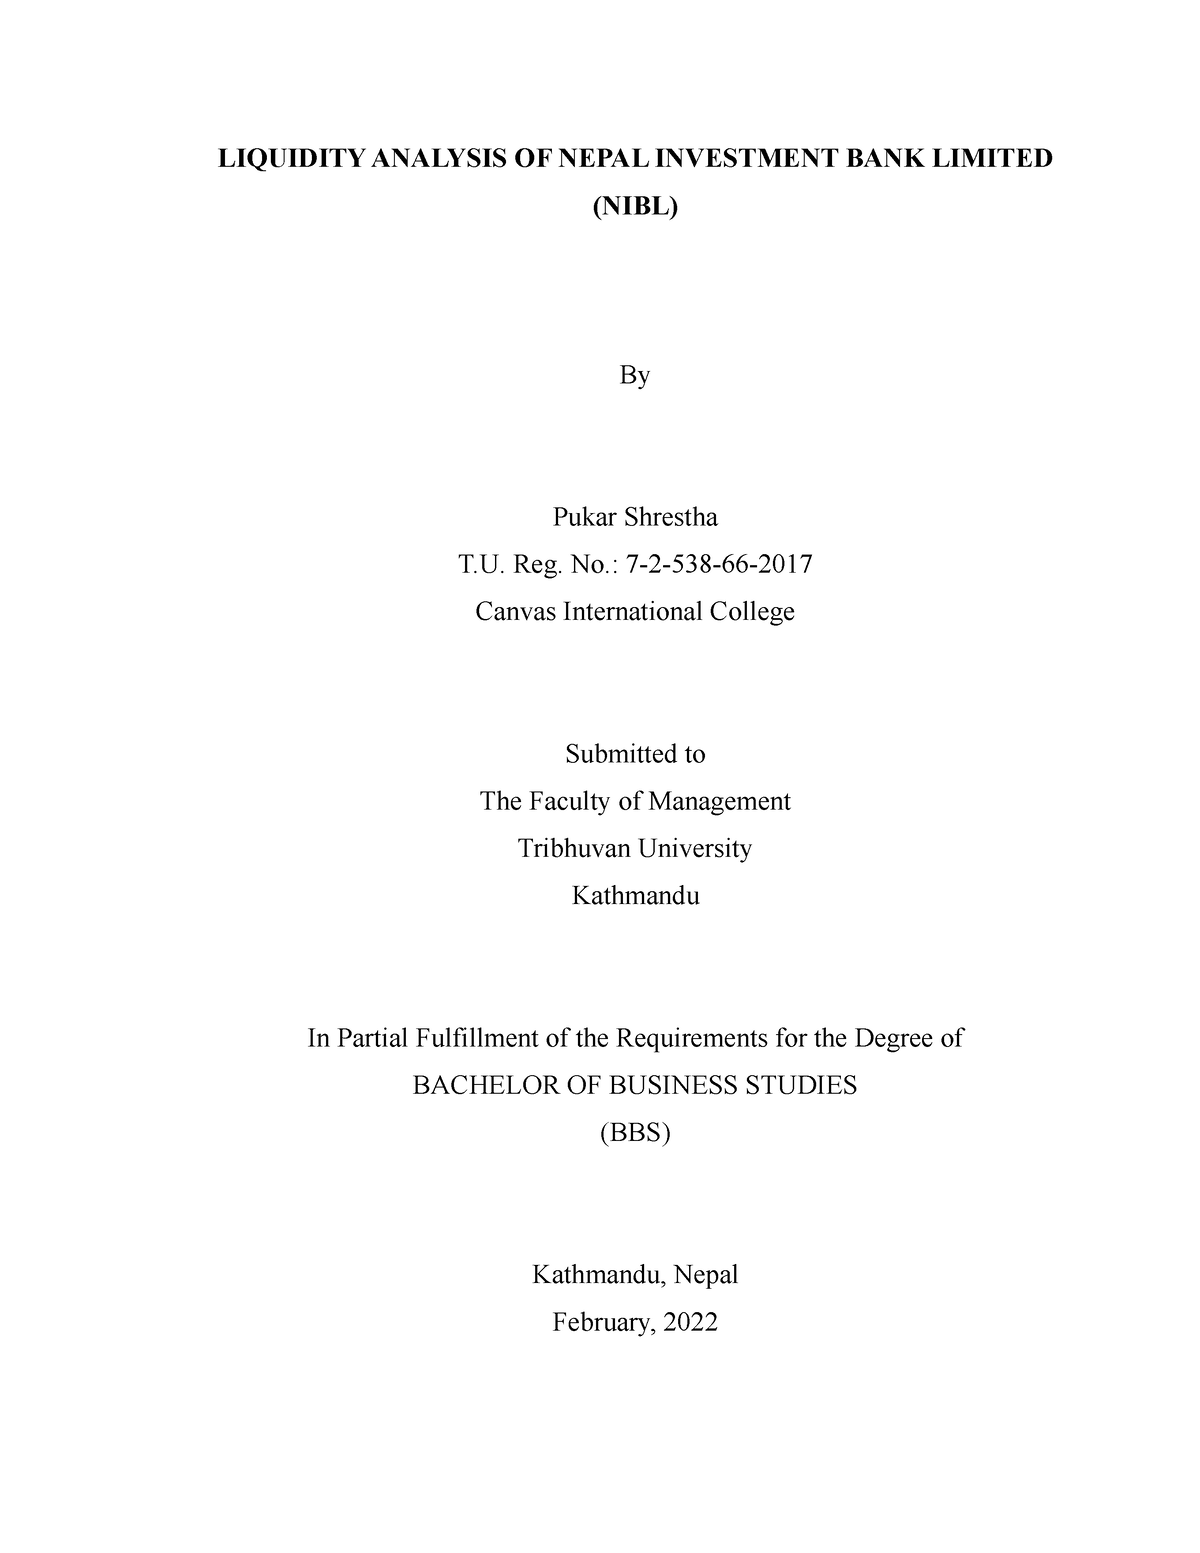 thesis for bbs 4th year